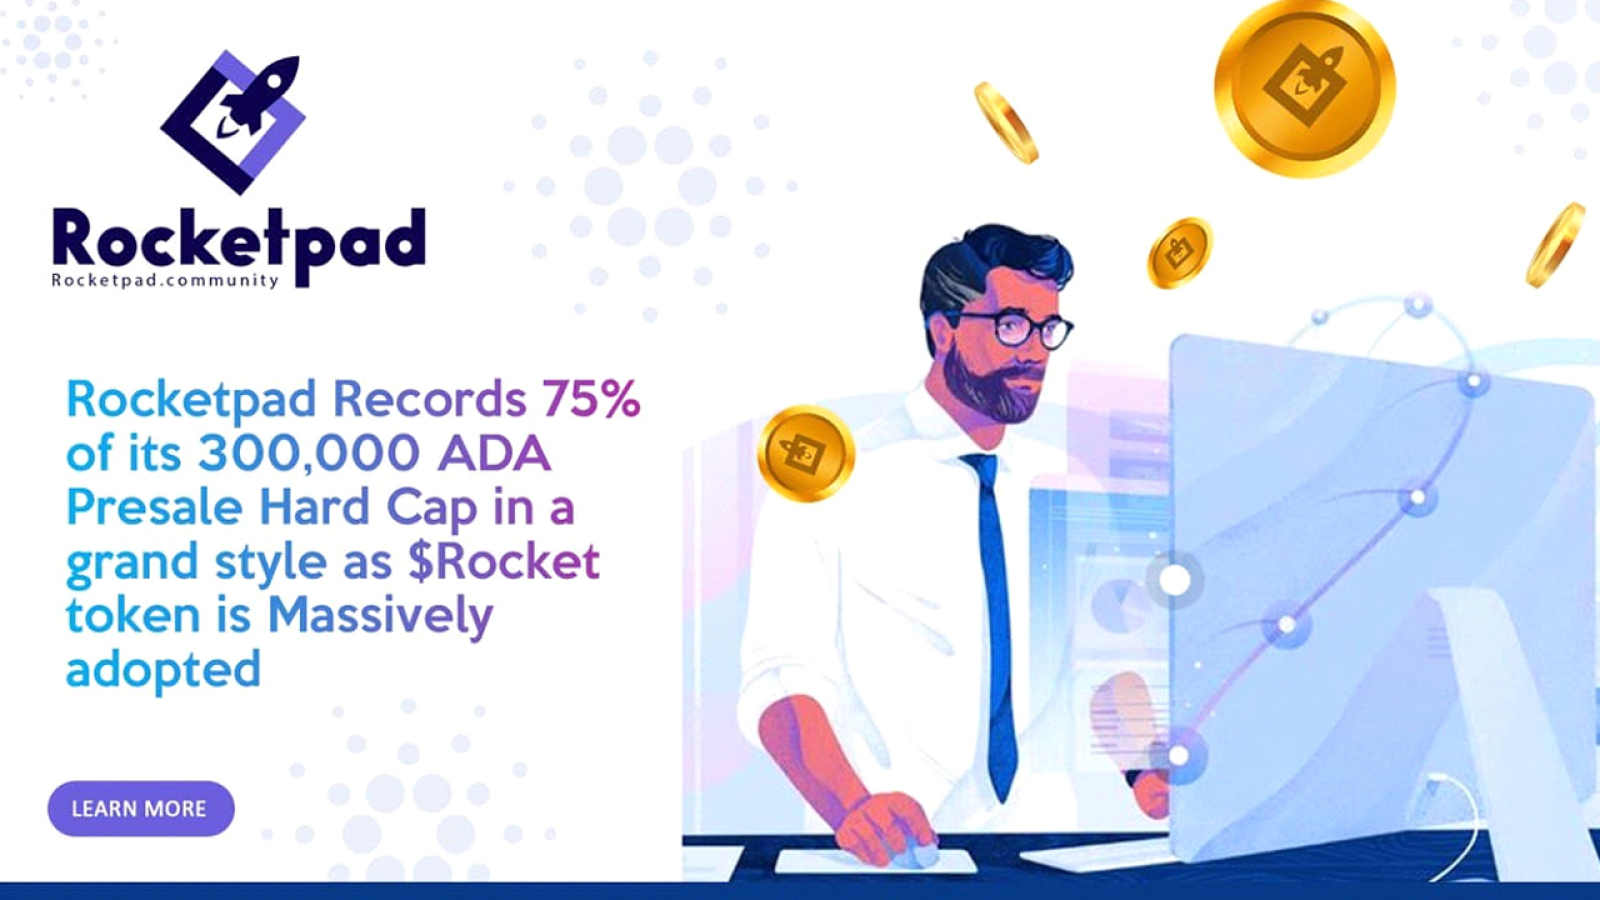 Rocketpad Records 75% of its 300,000 ADA Presale Hard Cap in a Grand Style as $Rocket Token is Massively Adopted